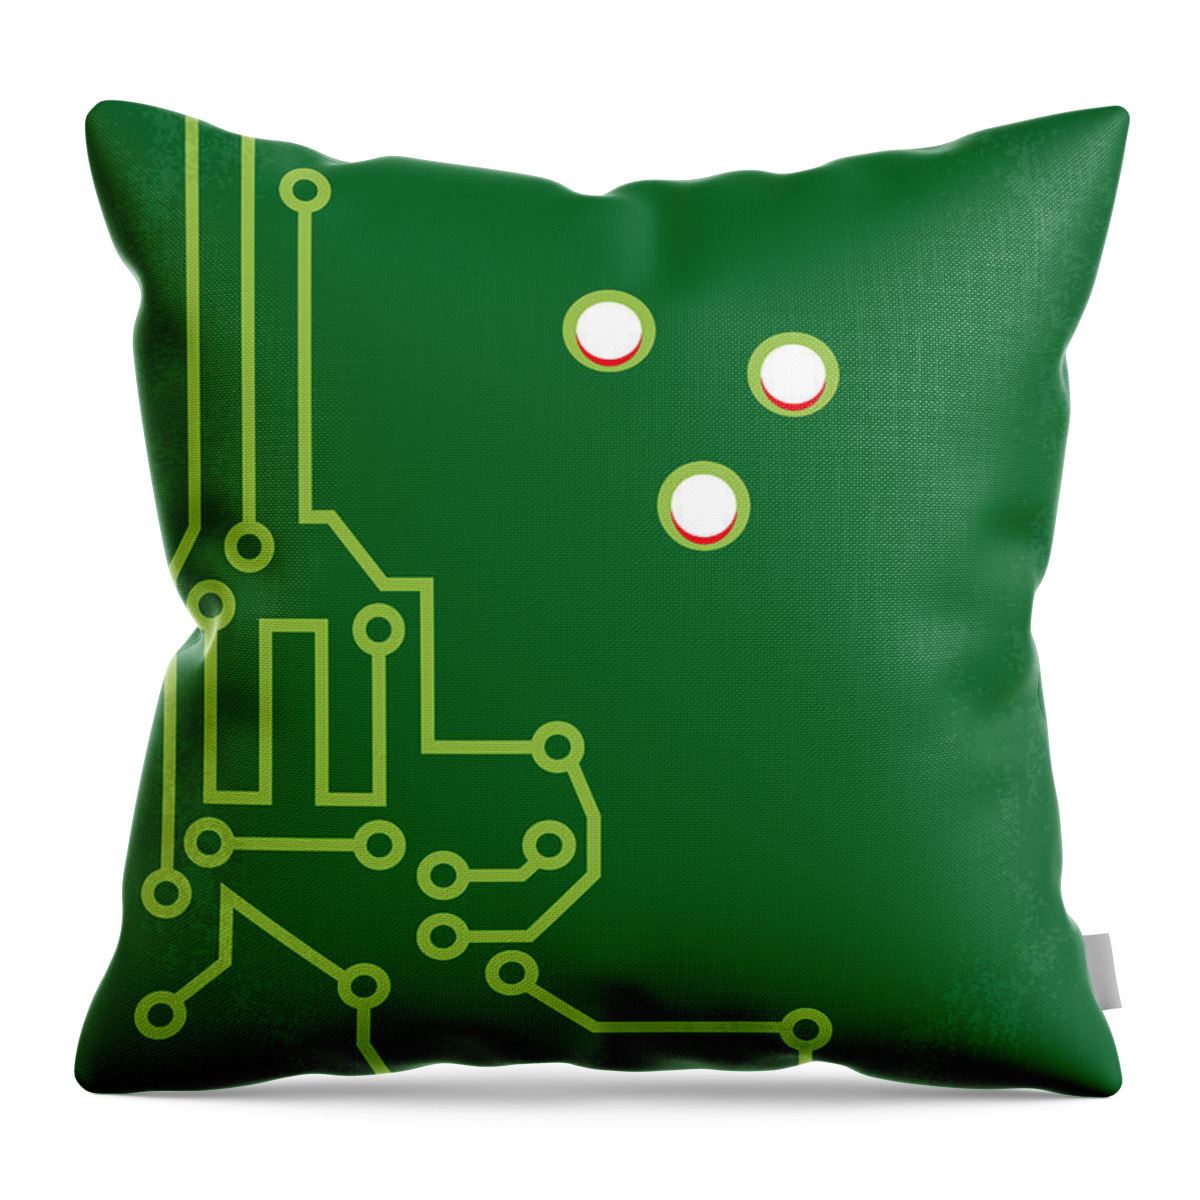 Westworld Throw Pillow featuring the digital art No231 My Westworld minimal movie poster by Chungkong Art